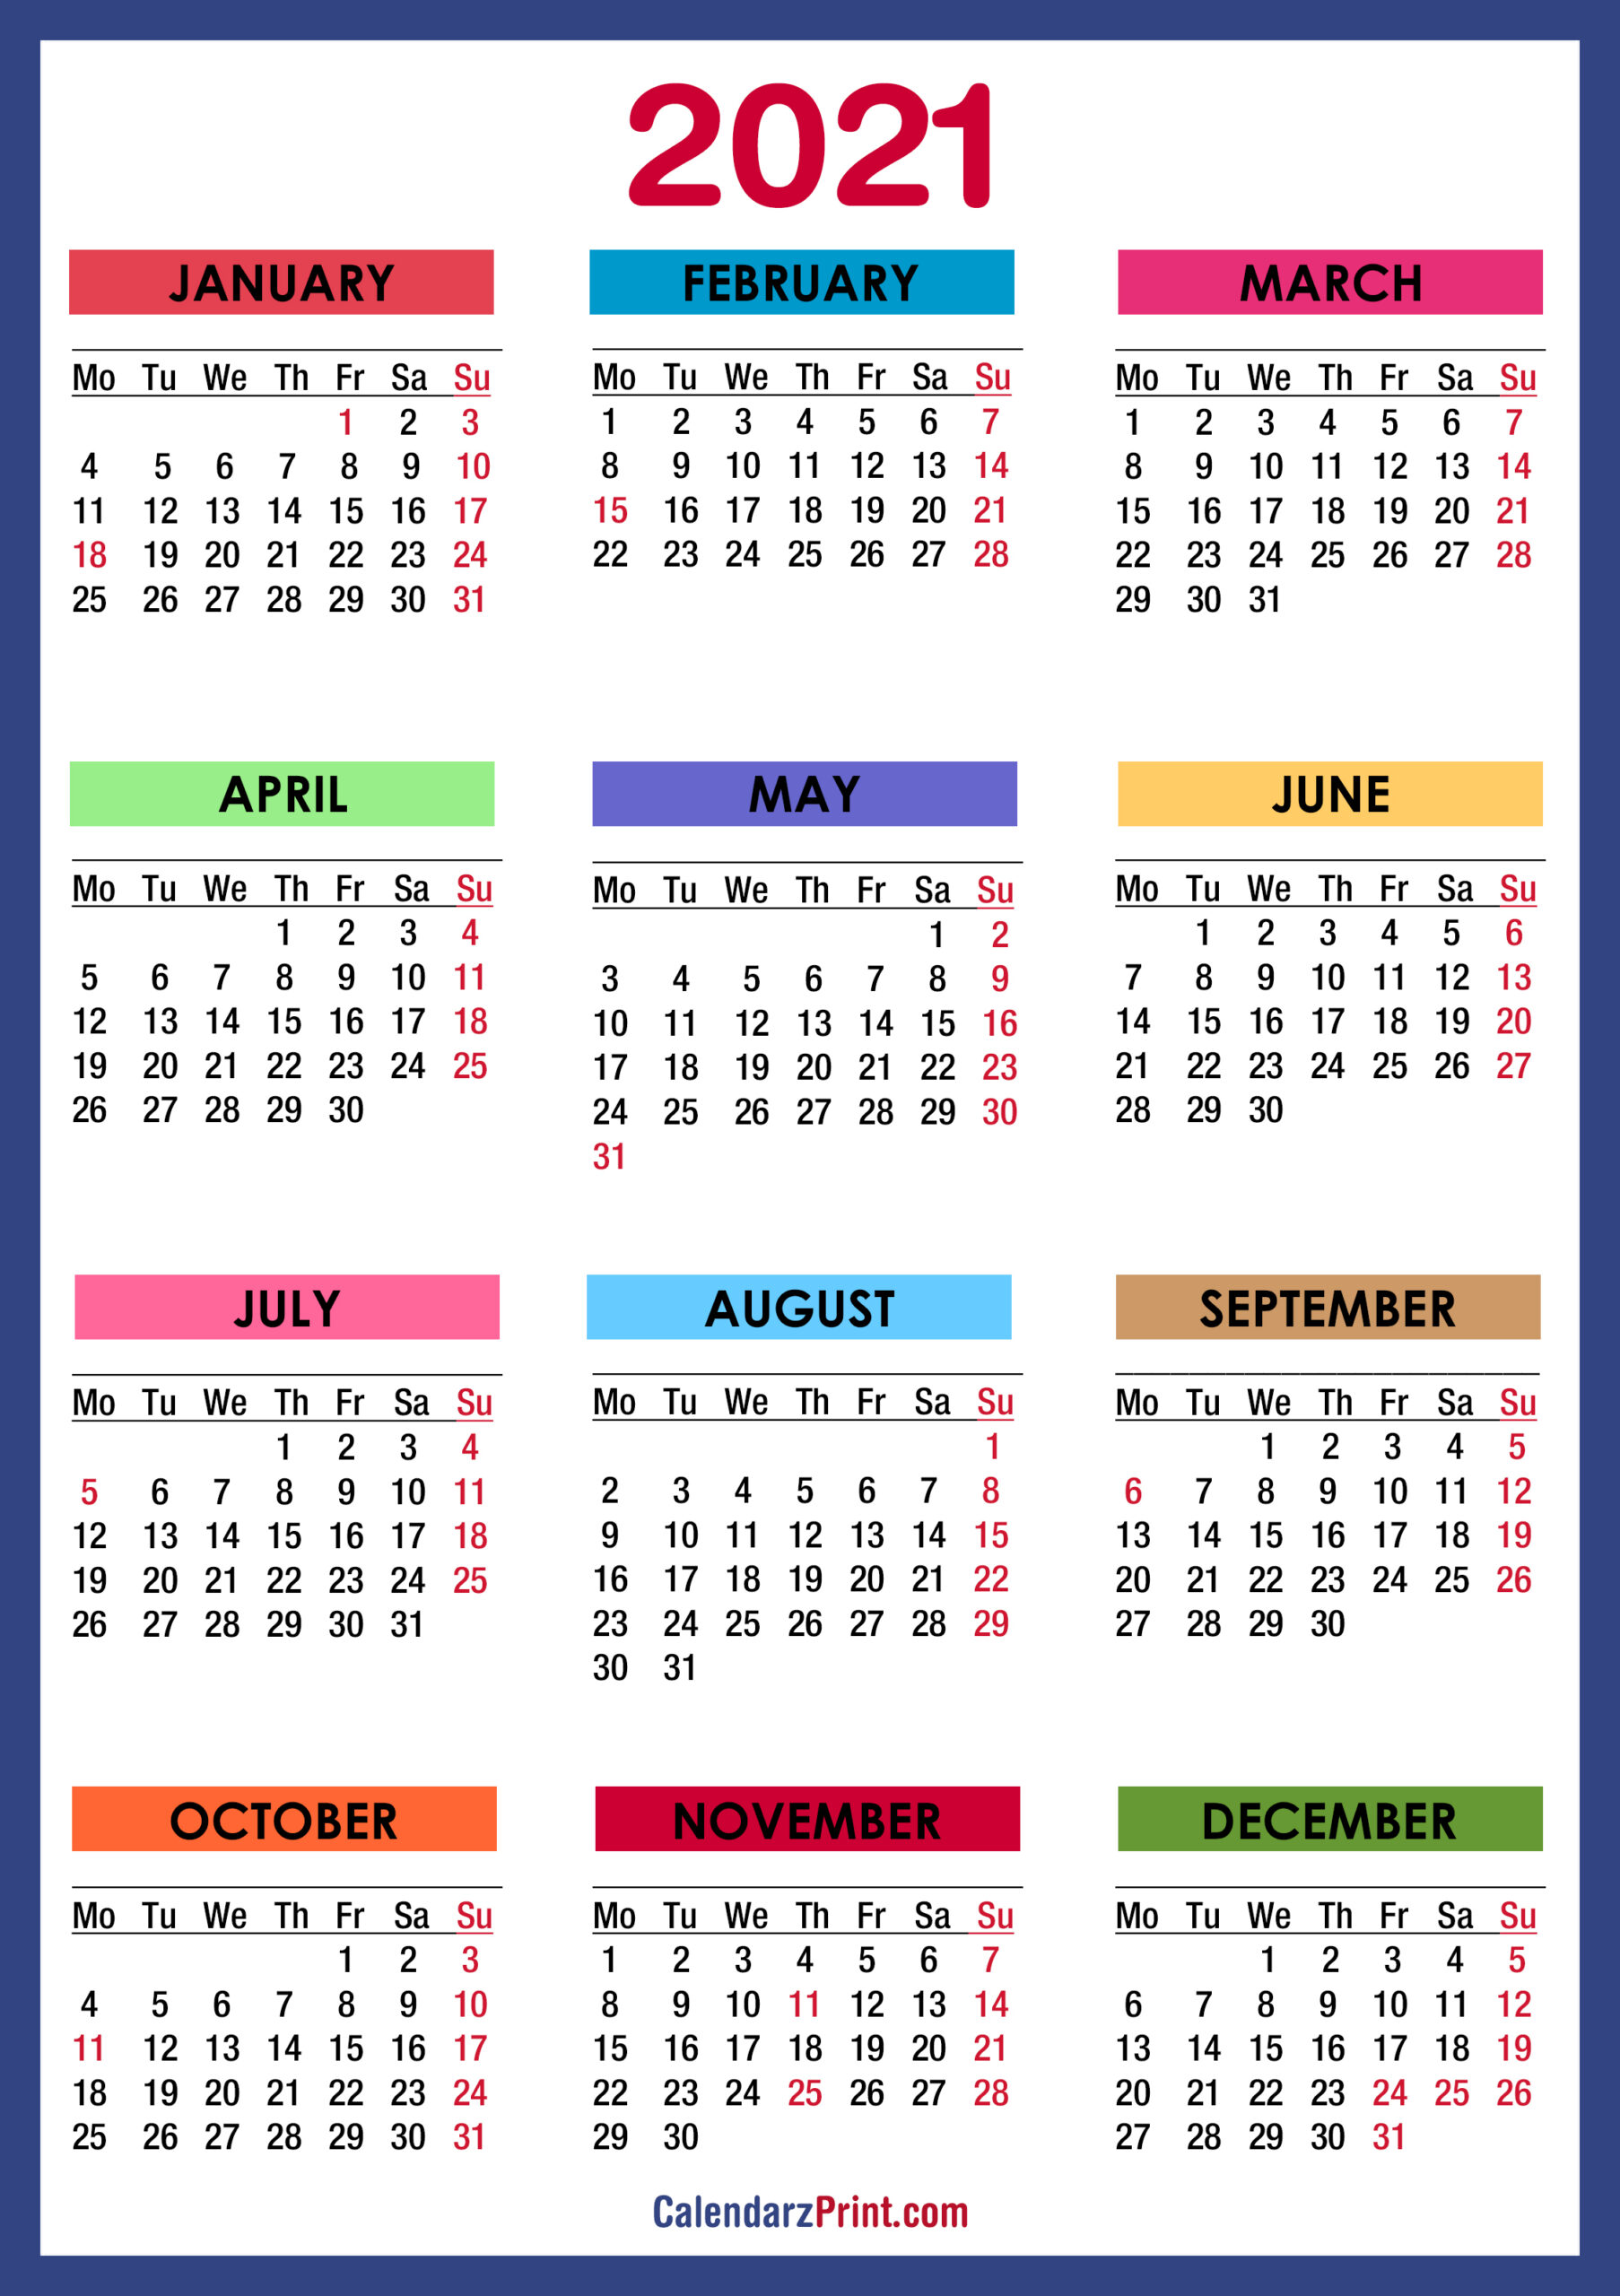 2021 Calendar With Holidays Printable Free Colorful Blue